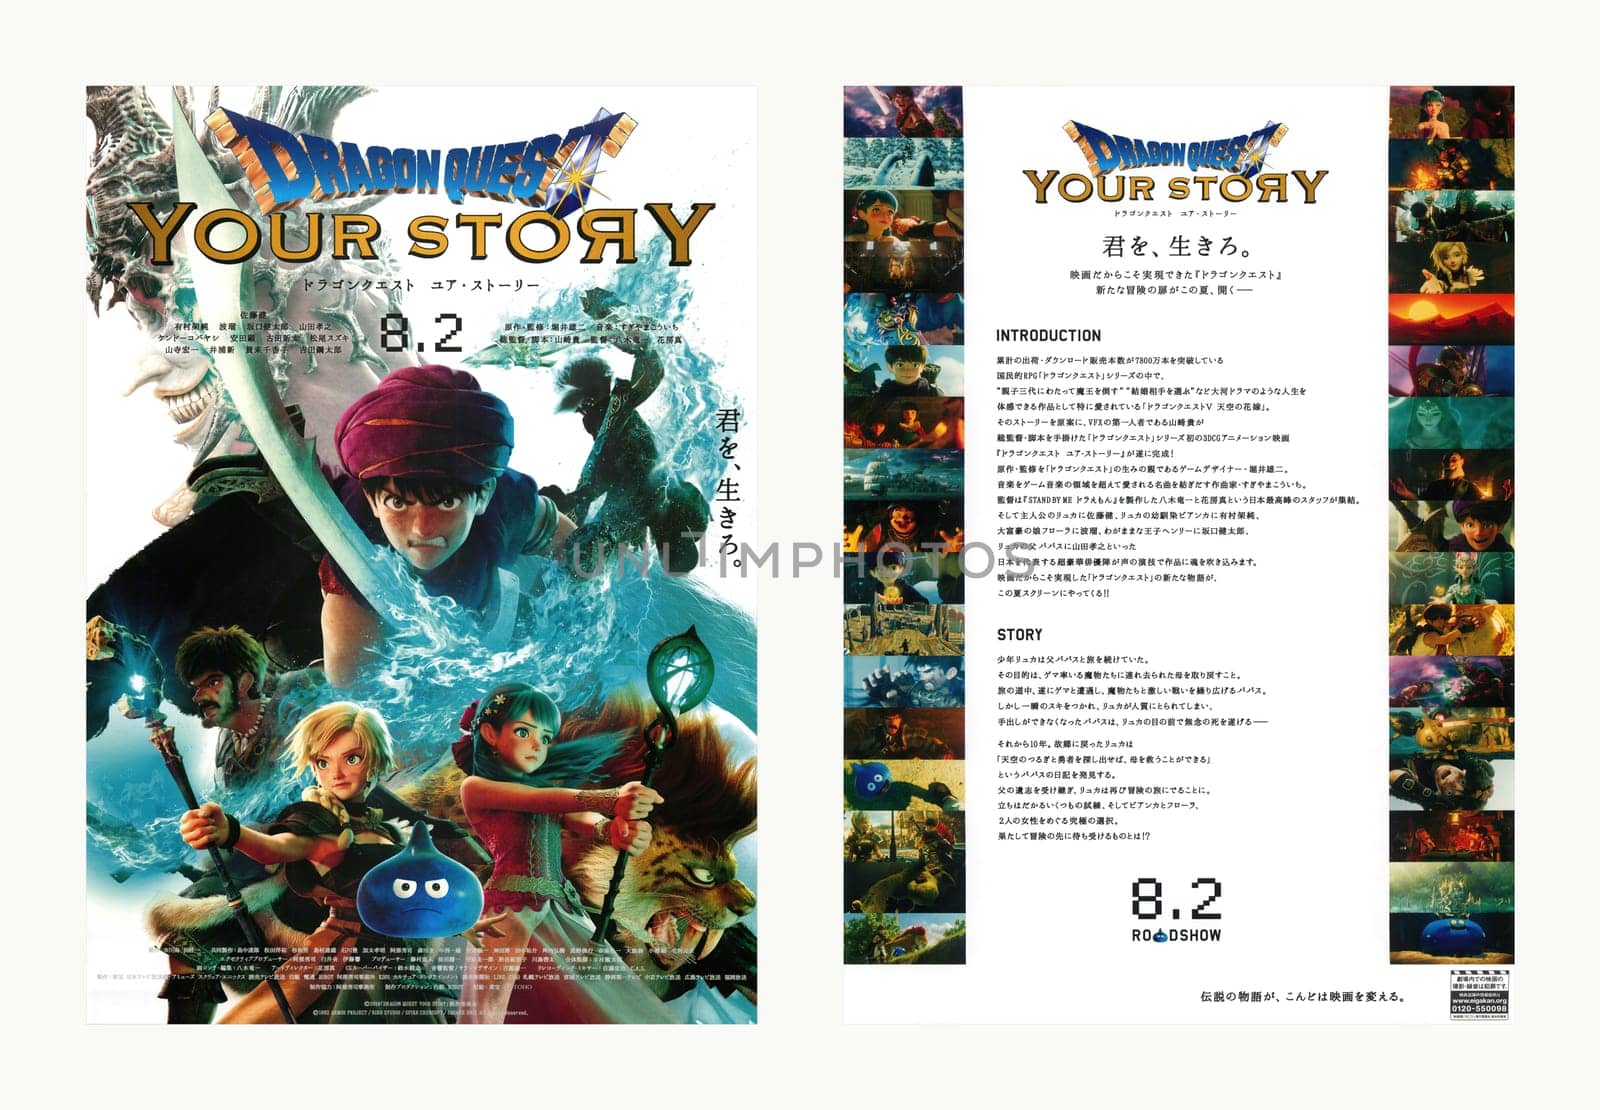 tokyo, japan - aug 2 2019: 1st teaser visual leaflet of the Japanese video game based 3D animated film "Dragon Quest: Your Story" by director Takashi Yamazaki featuring the famous robotic cat (left: front).